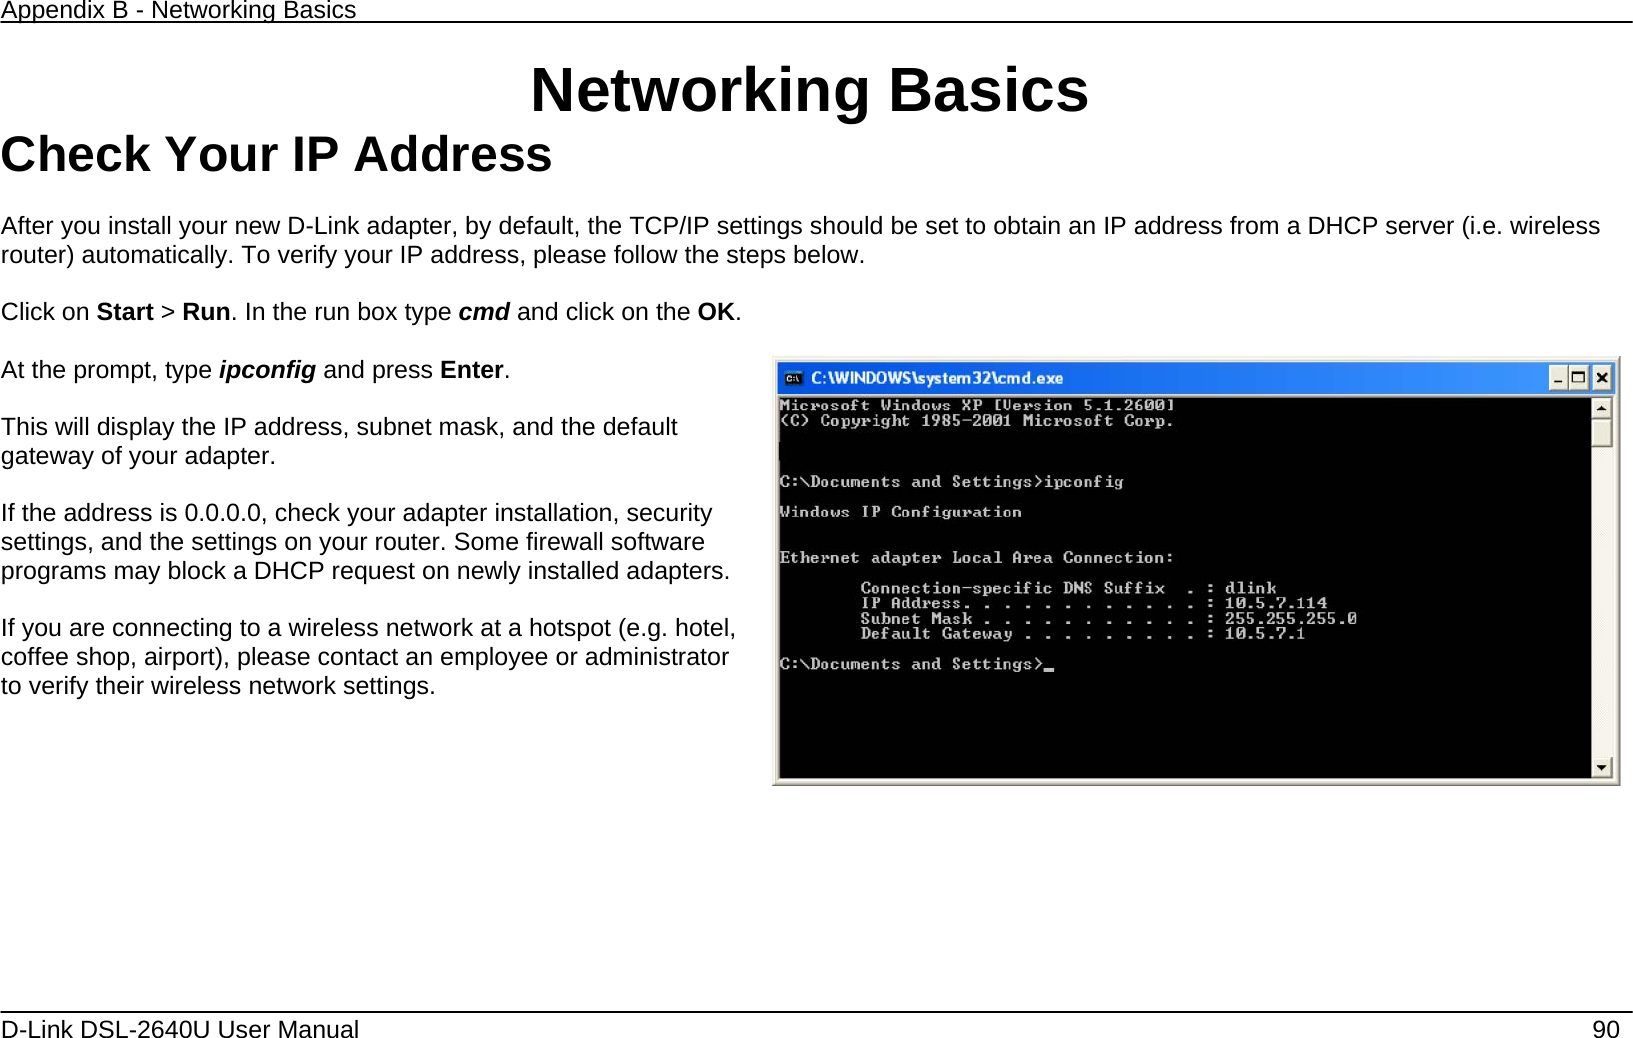 Appendix B - Networking Basics   D-Link DSL-2640U User Manual    90 Networking Basics Check Your IP Address  After you install your new D-Link adapter, by default, the TCP/IP settings should be set to obtain an IP address from a DHCP server (i.e. wireless router) automatically. To verify your IP address, please follow the steps below.  Click on Start &gt; Run. In the run box type cmd and click on the OK.  At the prompt, type ipconfig and press Enter.  This will display the IP address, subnet mask, and the default gateway of your adapter.  If the address is 0.0.0.0, check your adapter installation, security settings, and the settings on your router. Some firewall software programs may block a DHCP request on newly installed adapters.  If you are connecting to a wireless network at a hotspot (e.g. hotel, coffee shop, airport), please contact an employee or administrator to verify their wireless network settings.    